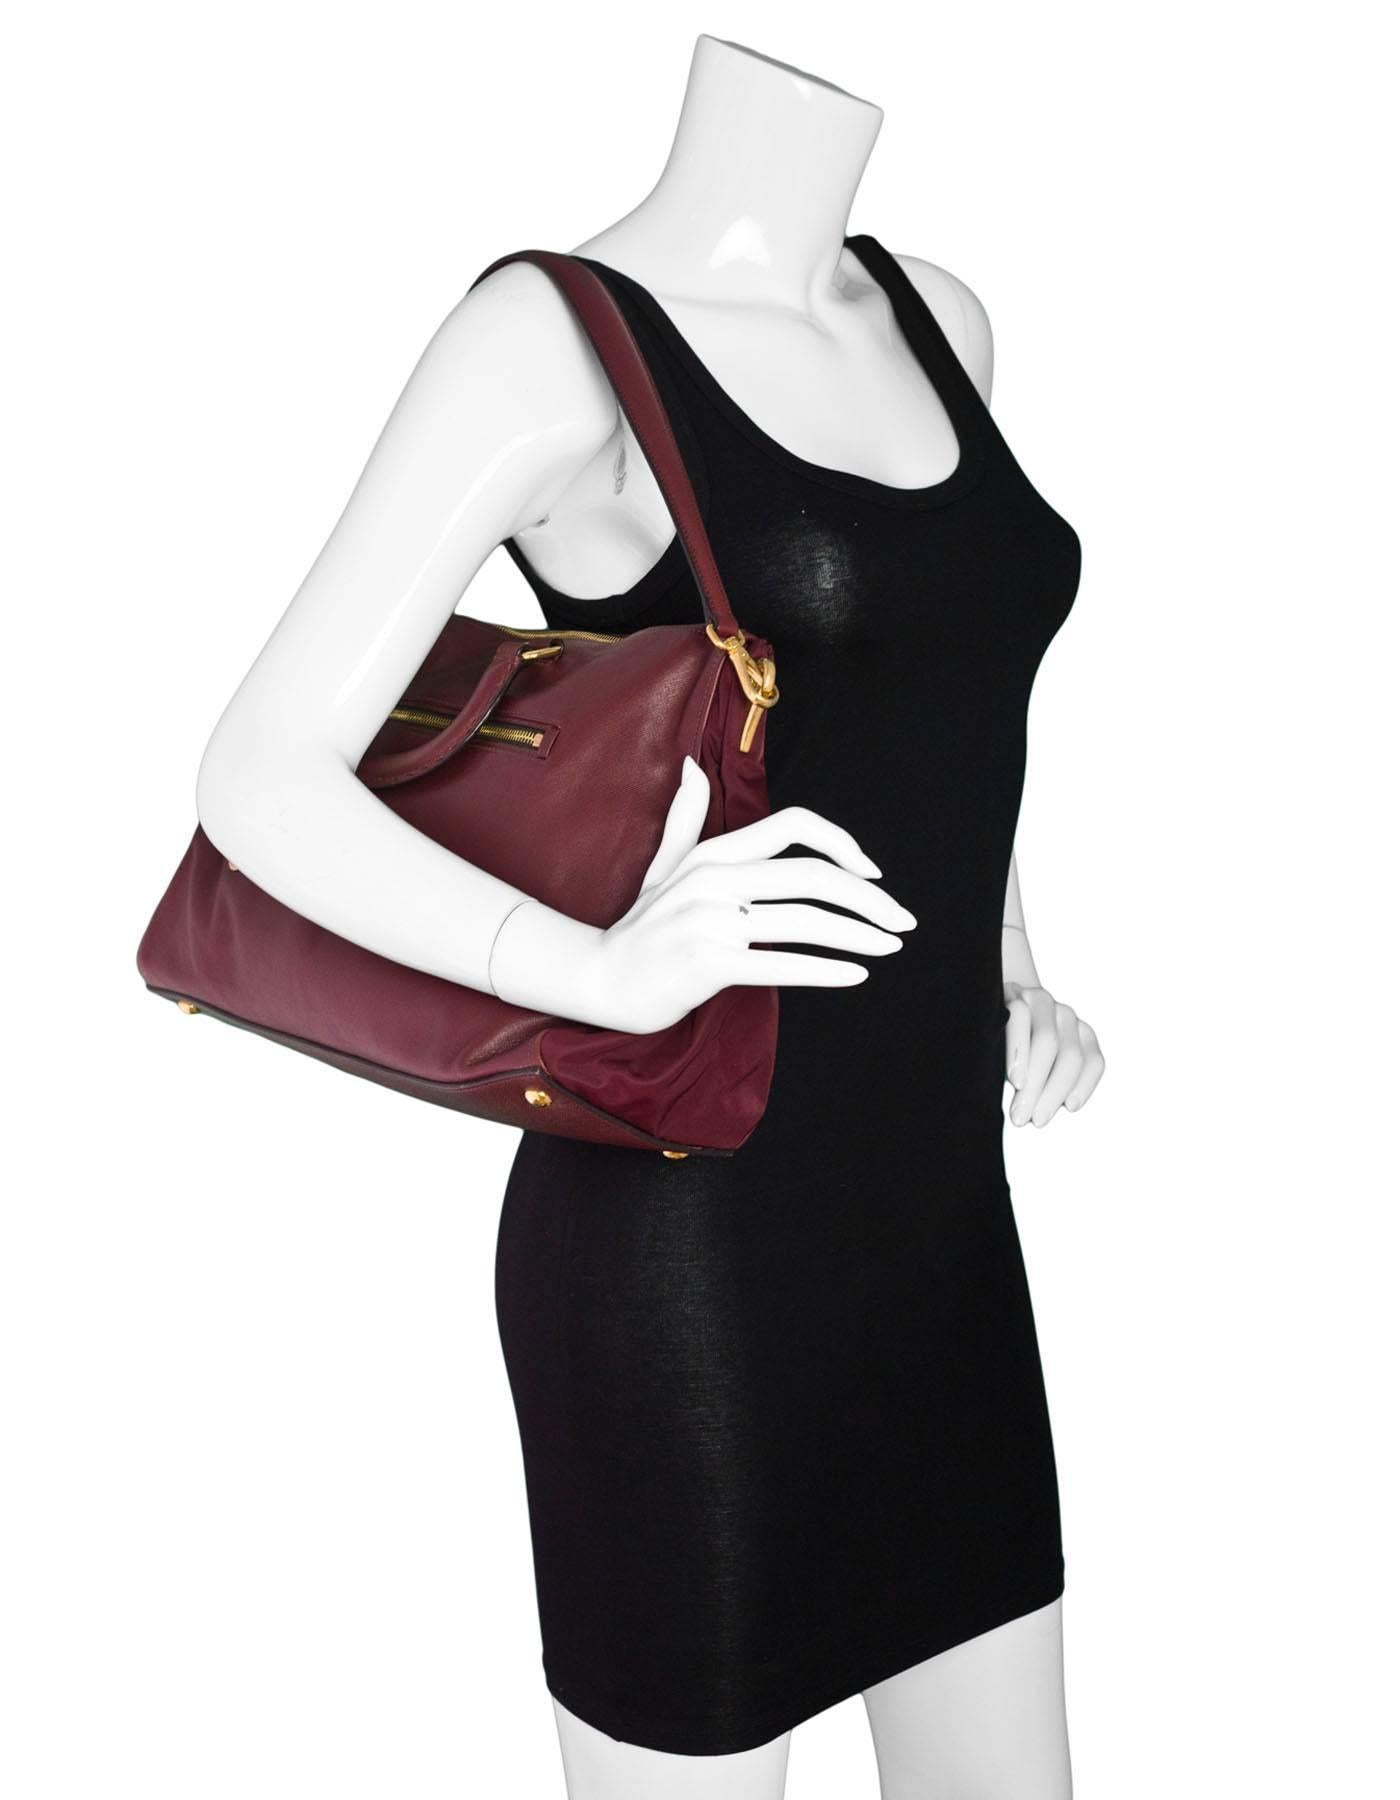 Prada Burgundy Tessuto & Saffiano Satchel Bag

Made In: Italy
Color: Burgundy
Materials: Leather, nylon, metal
Lining: Burgundy textile
Closure/Opening: Zip top
Exterior Pockets: Zip pocket at front and back
Interior Pockets: One zip pocket, one